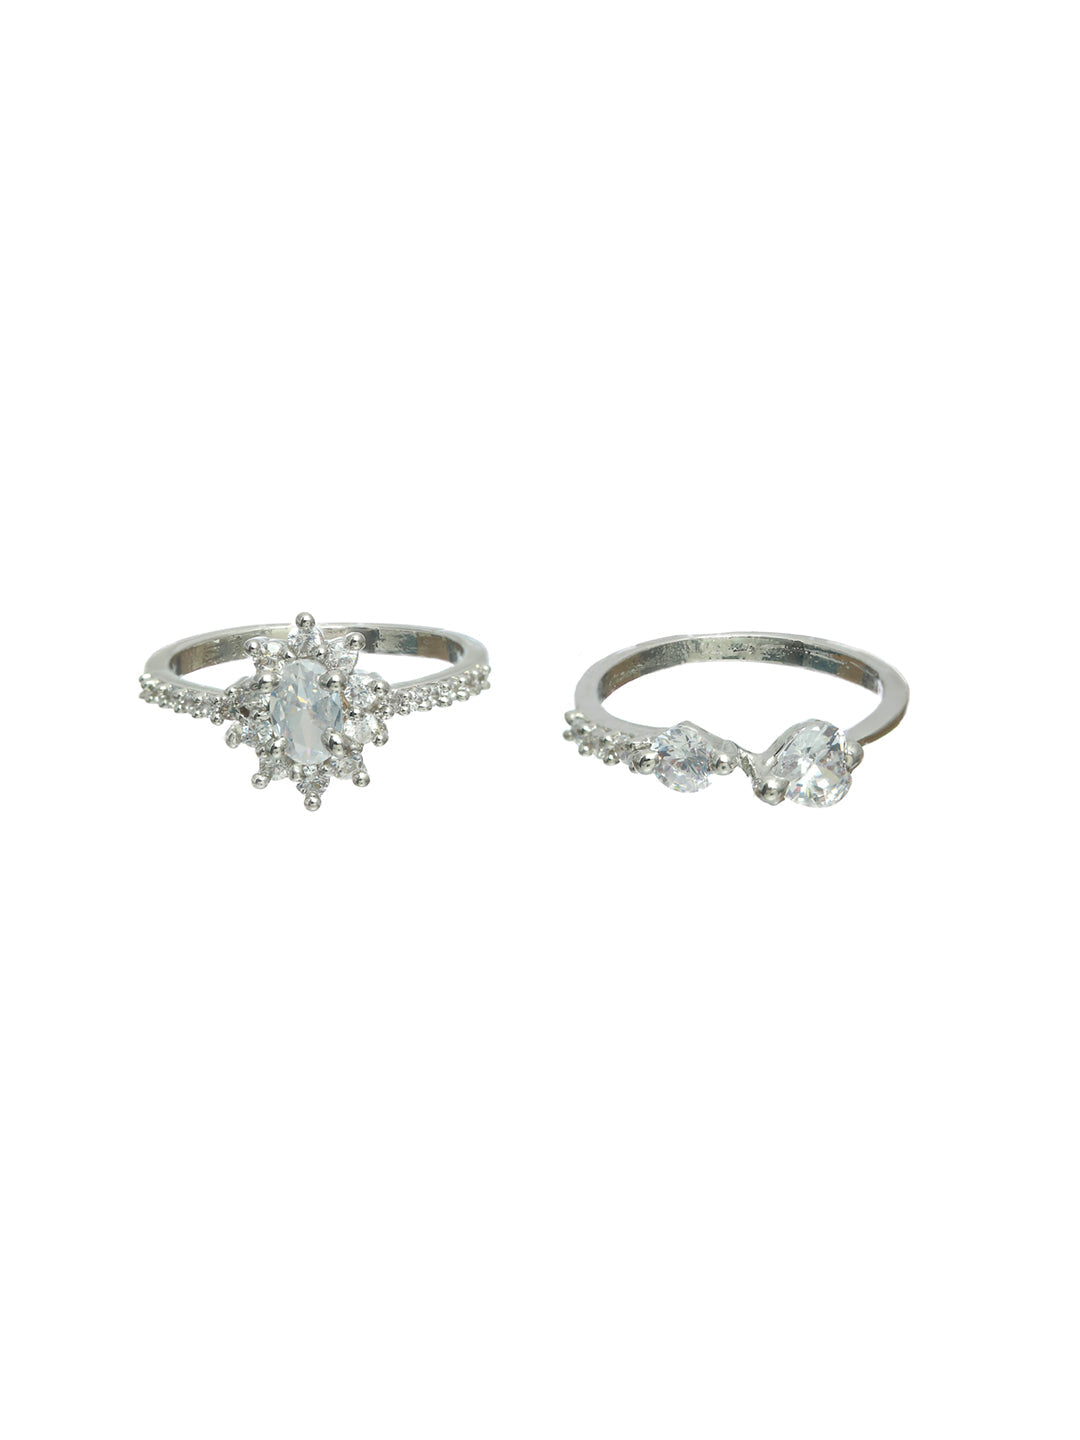 Floral American Diamond Silver Plated Ring Set of 2 - NOZ2TOZ